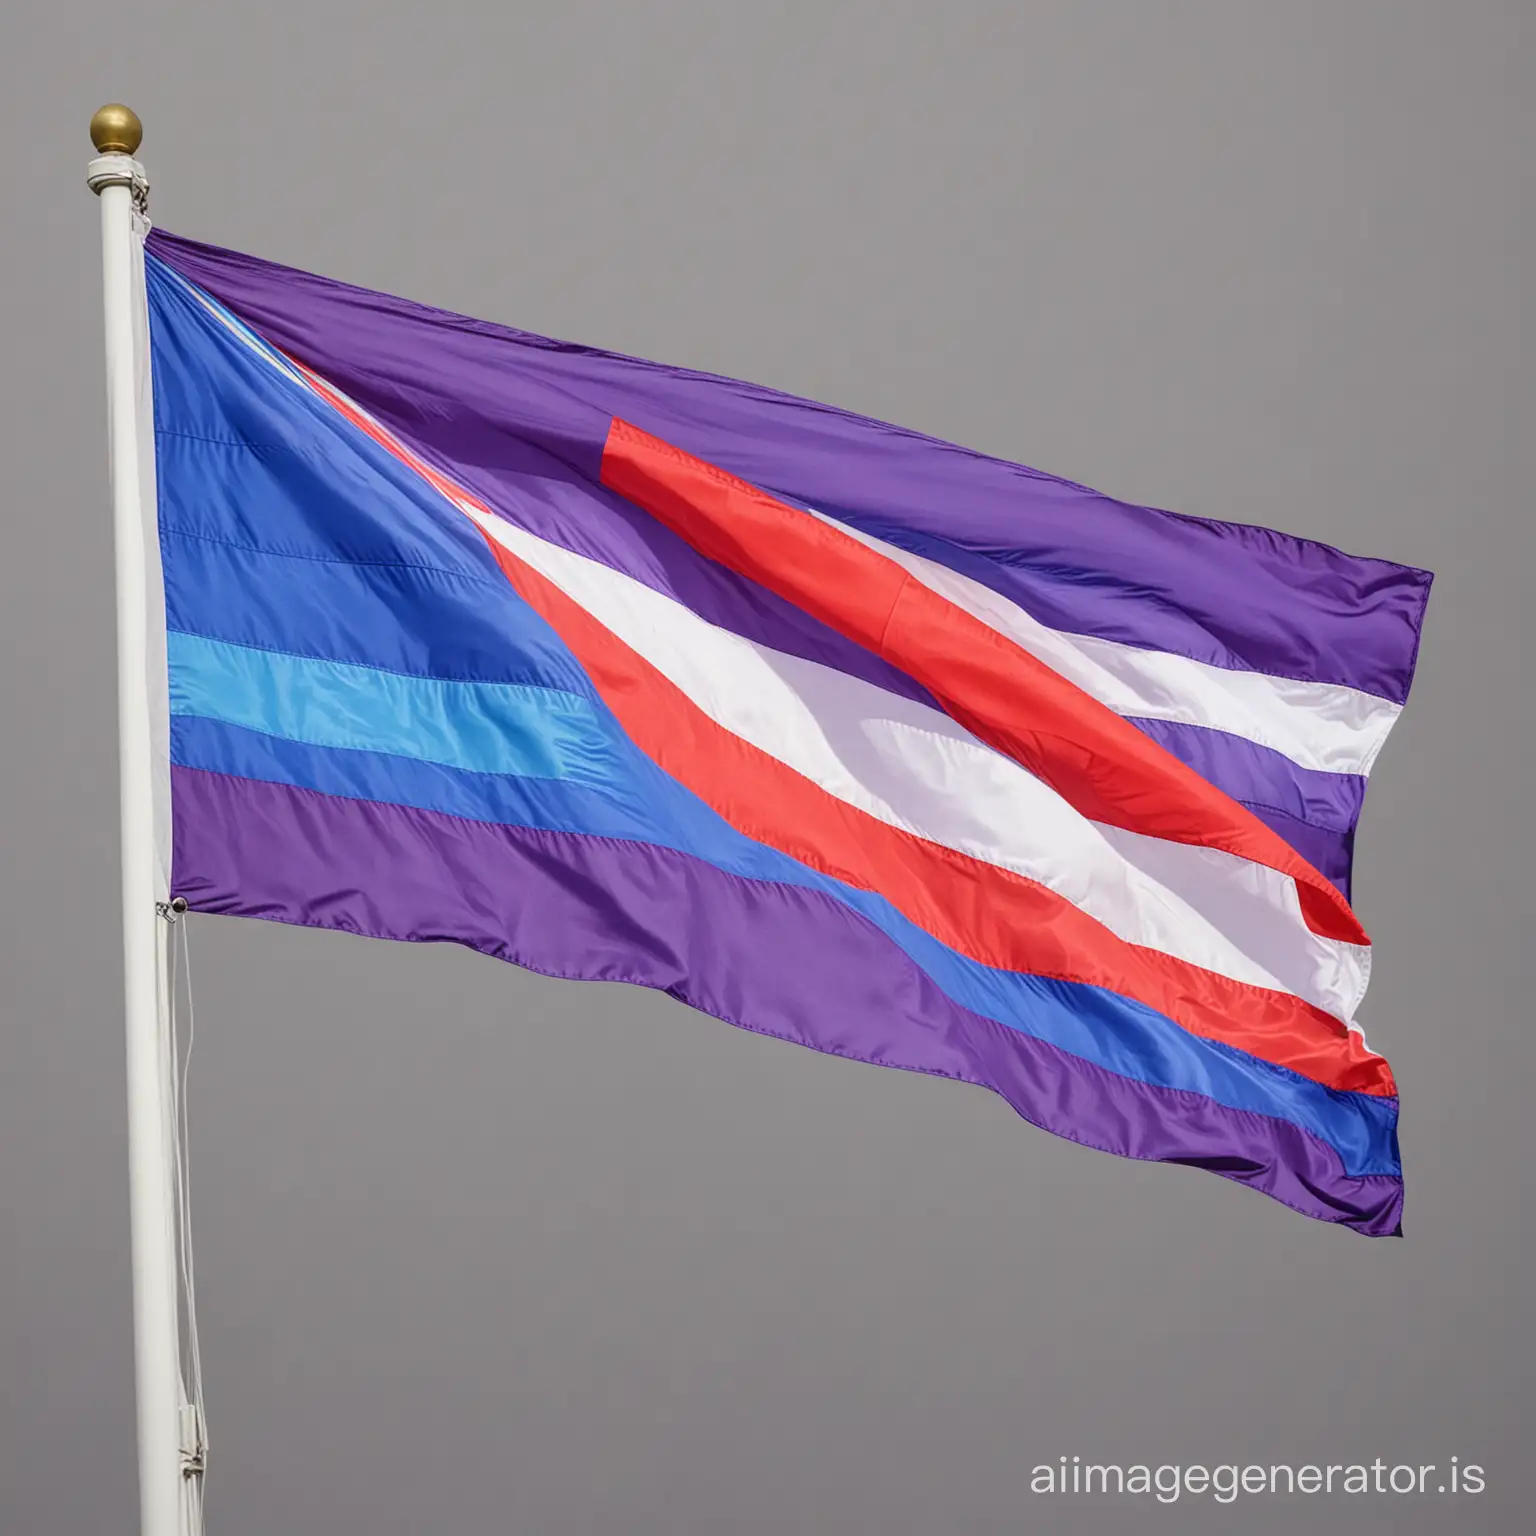 Colorful-Tricolor-Oblong-Flag-with-Red-Blue-and-Purple-Stripes